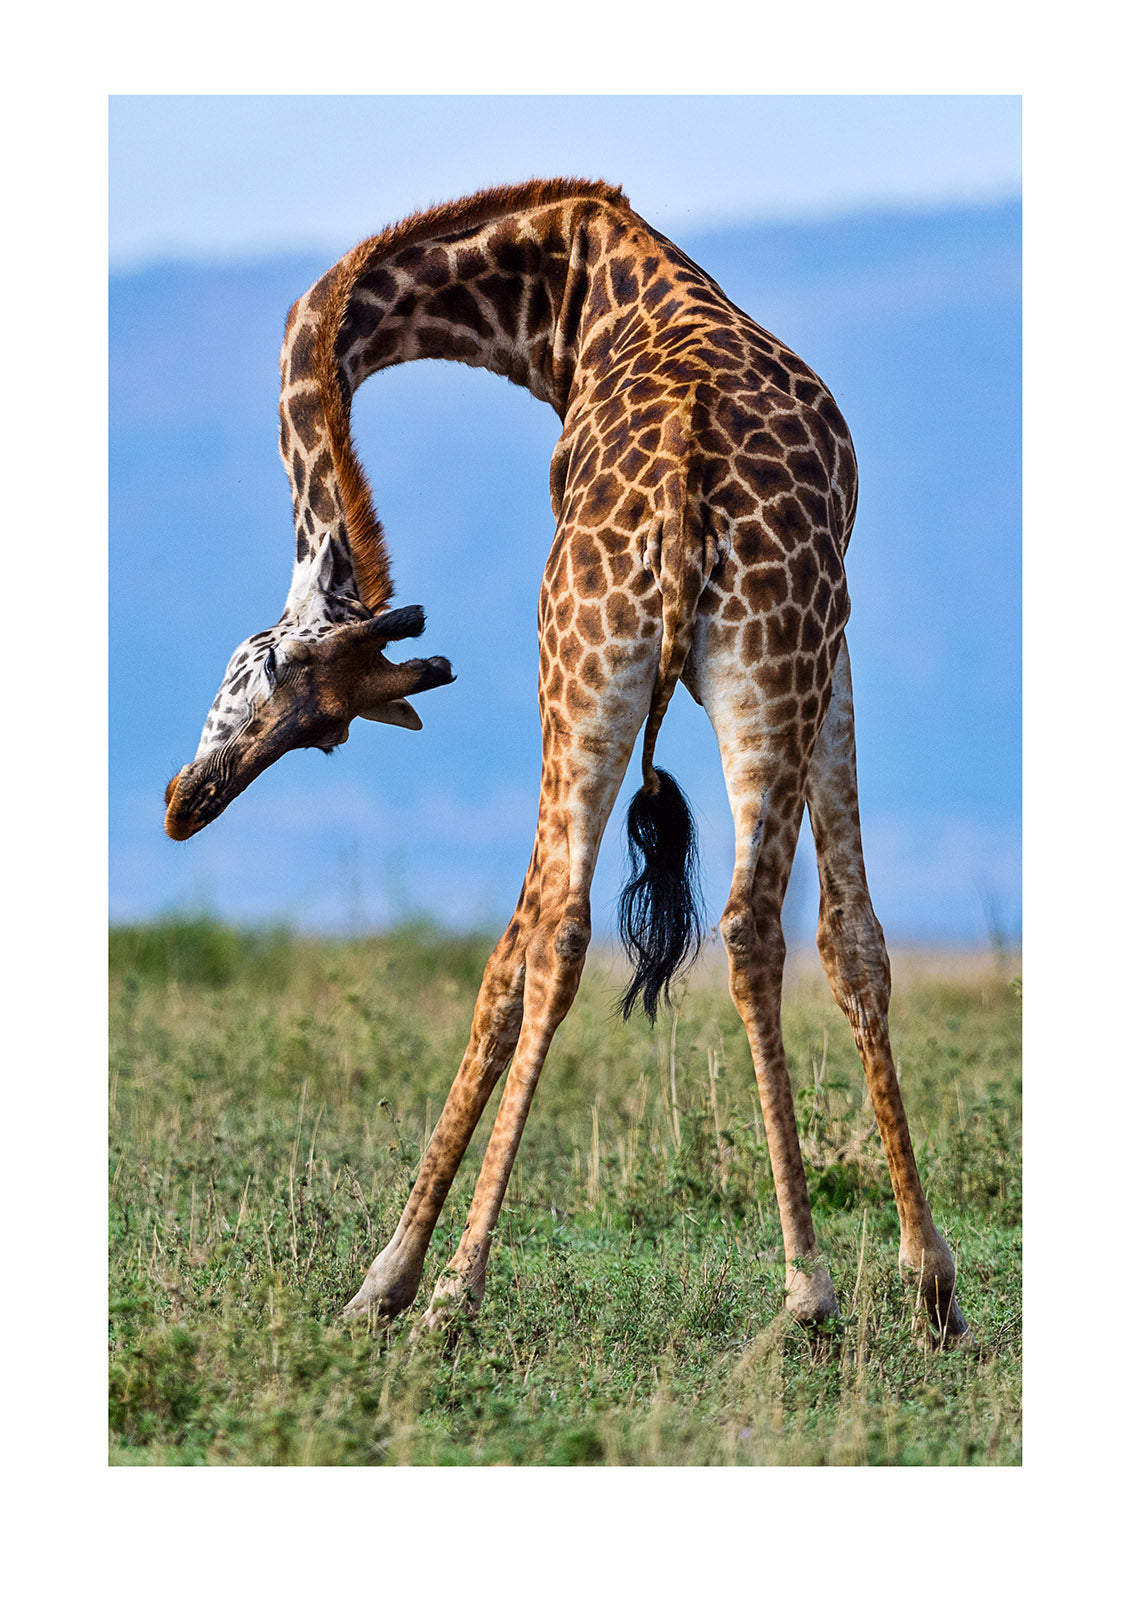 Giraffe may tower more than 6m (20ft), however they have an amazing similarity with the common house mouse who stretches out to a whopping 10cm (4in). They both possess 7x cervical vertebrae in their necks! These bones differ enormously in size but serve the same purpose.  Serengeti National Park, Tanzania.